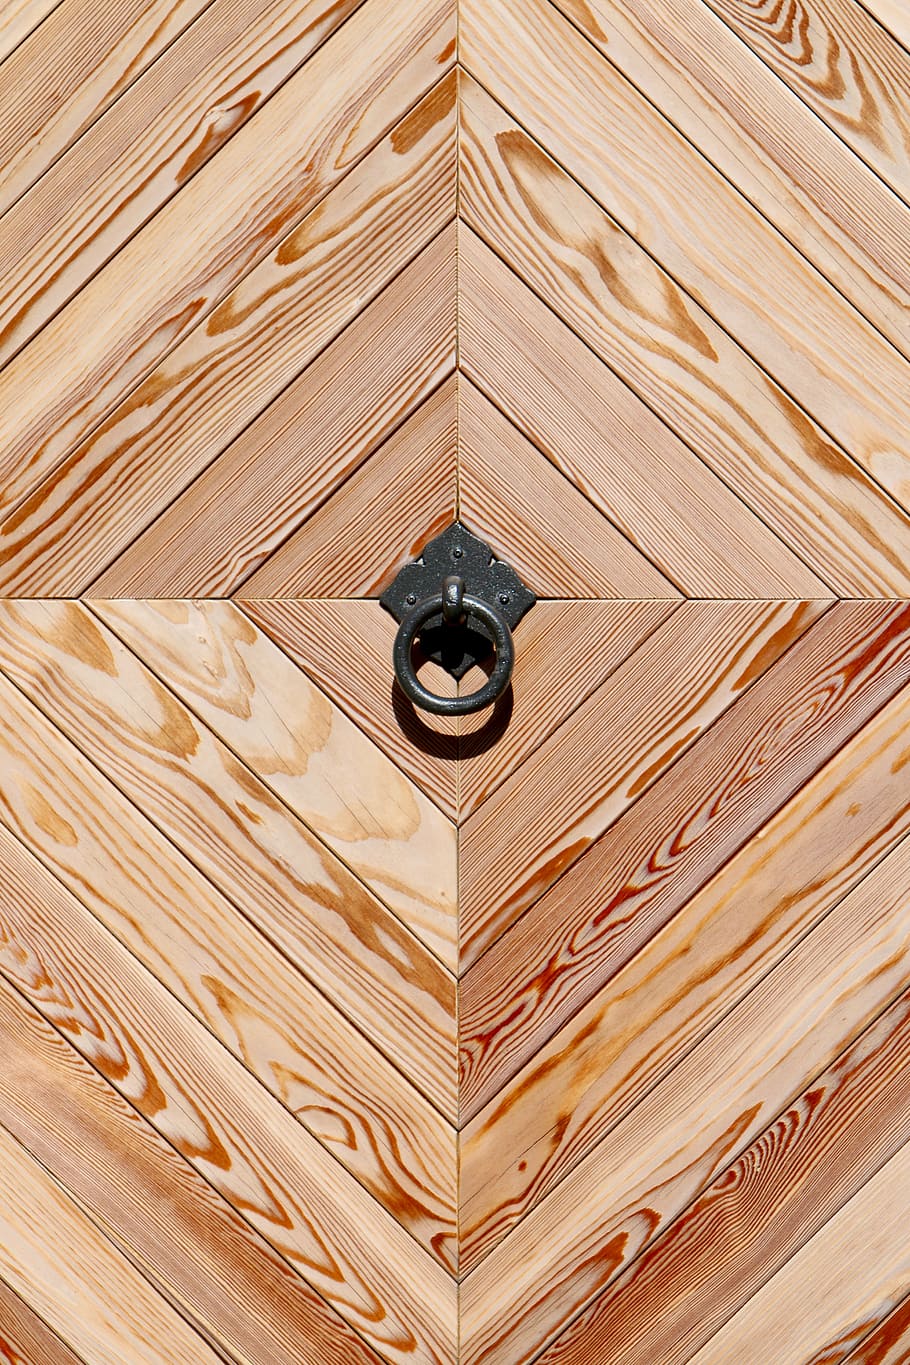 wooden door, call waiting ring, geometric shape, wood - material, pattern, brown, backgrounds, full frame, textured, close-up